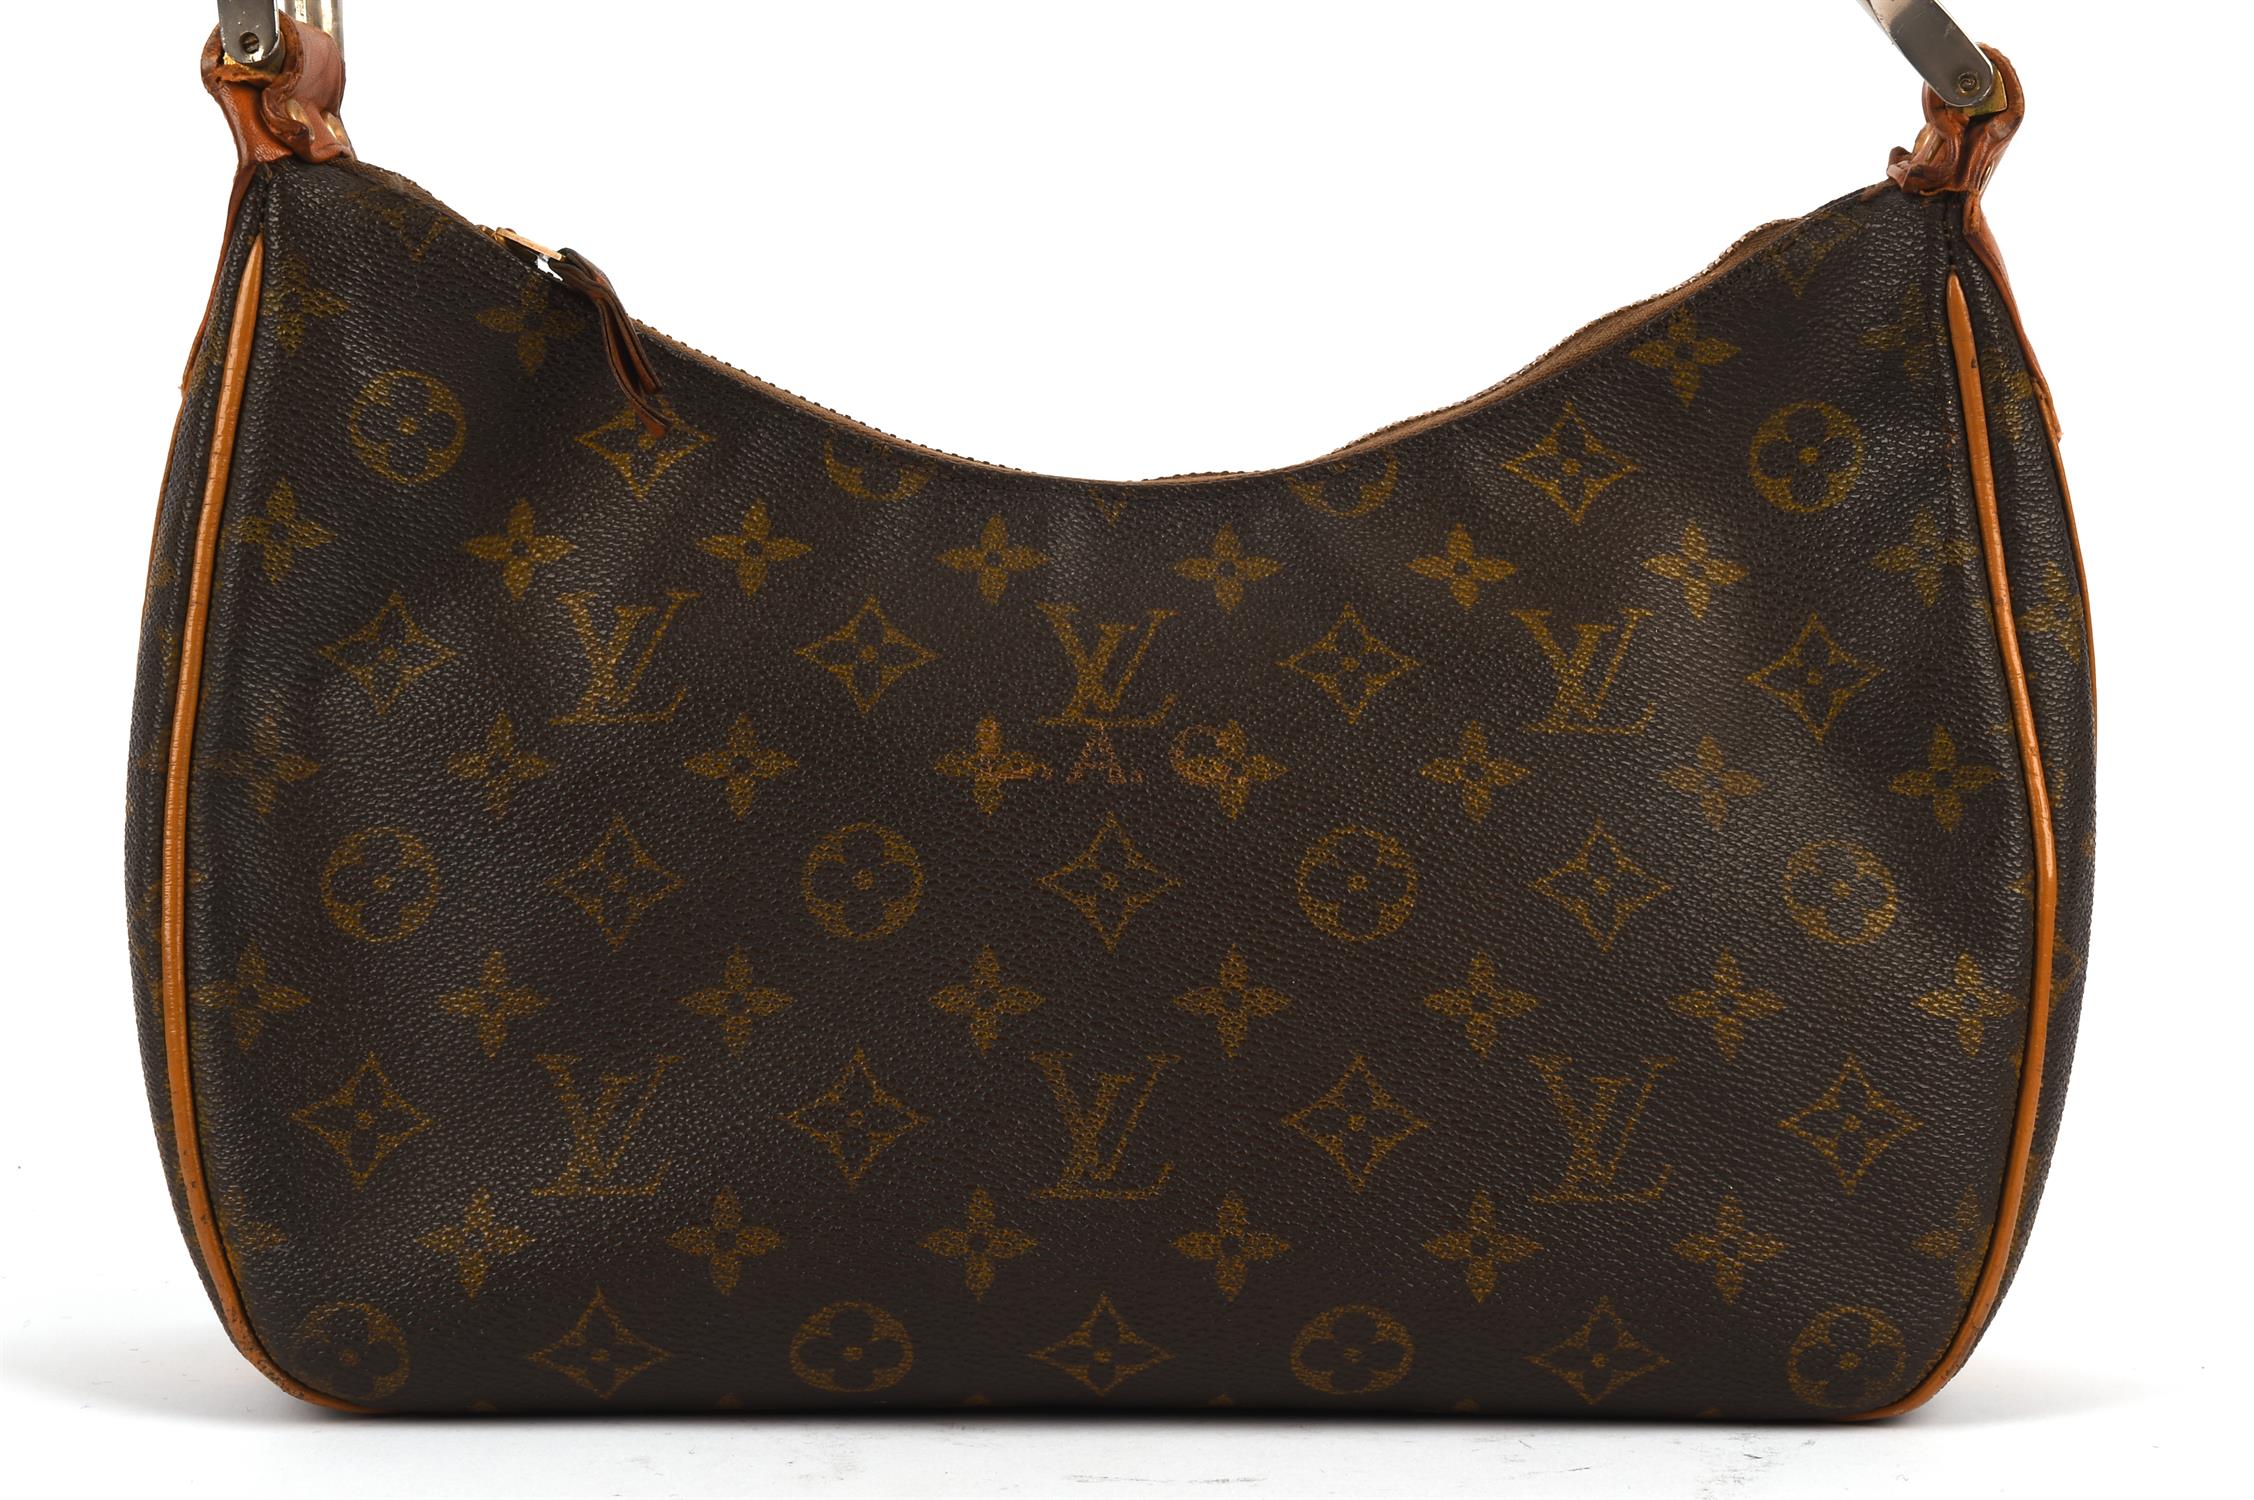 LOUIS VUITTON vintage monogrammed TIKAL style small handbag/ shoulder bag with faded initials AG on - Image 2 of 10